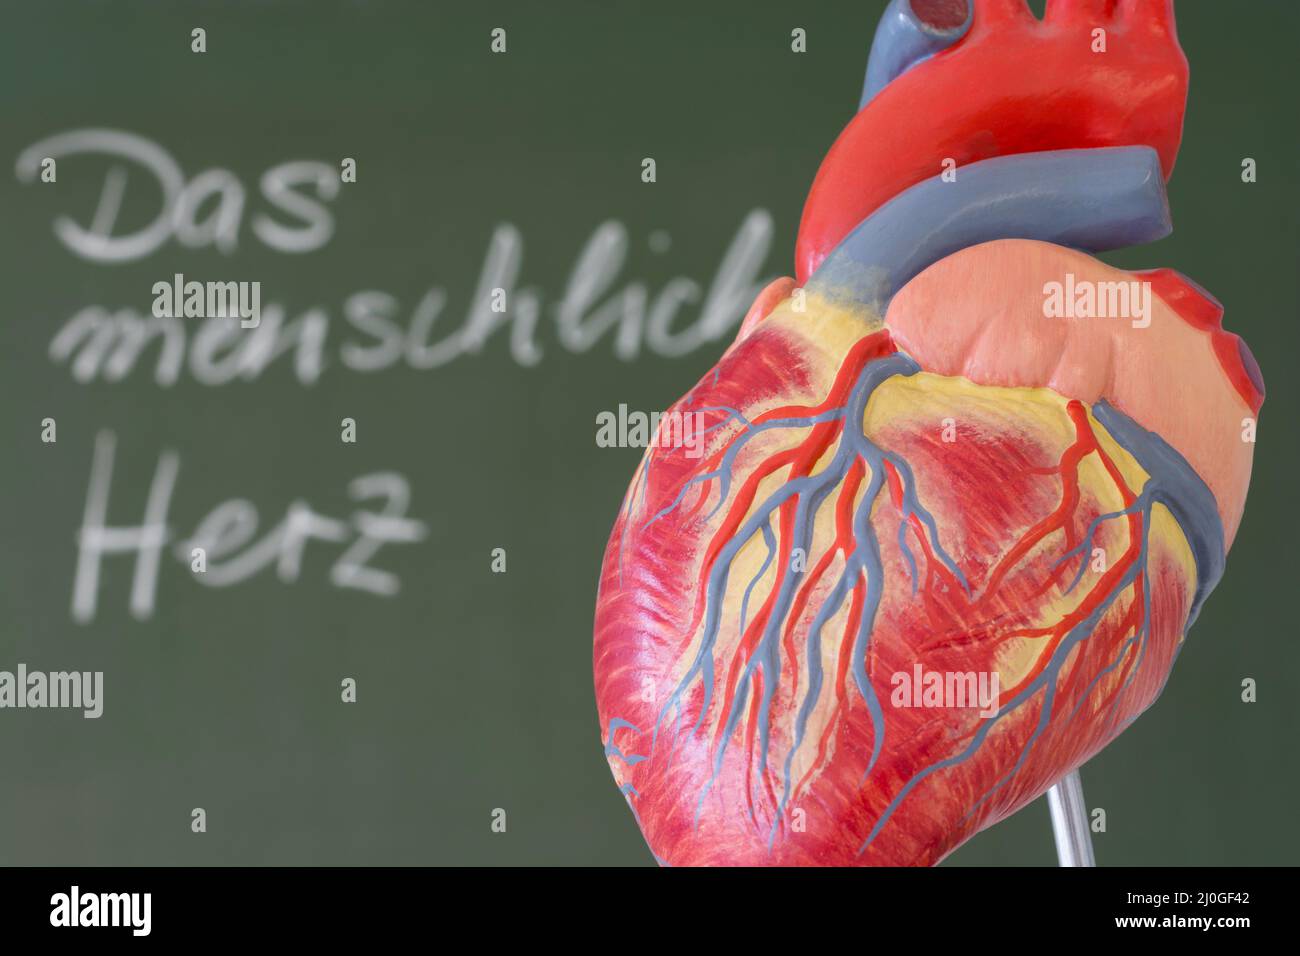 Human heart with chalkboard in the background Stock Photo